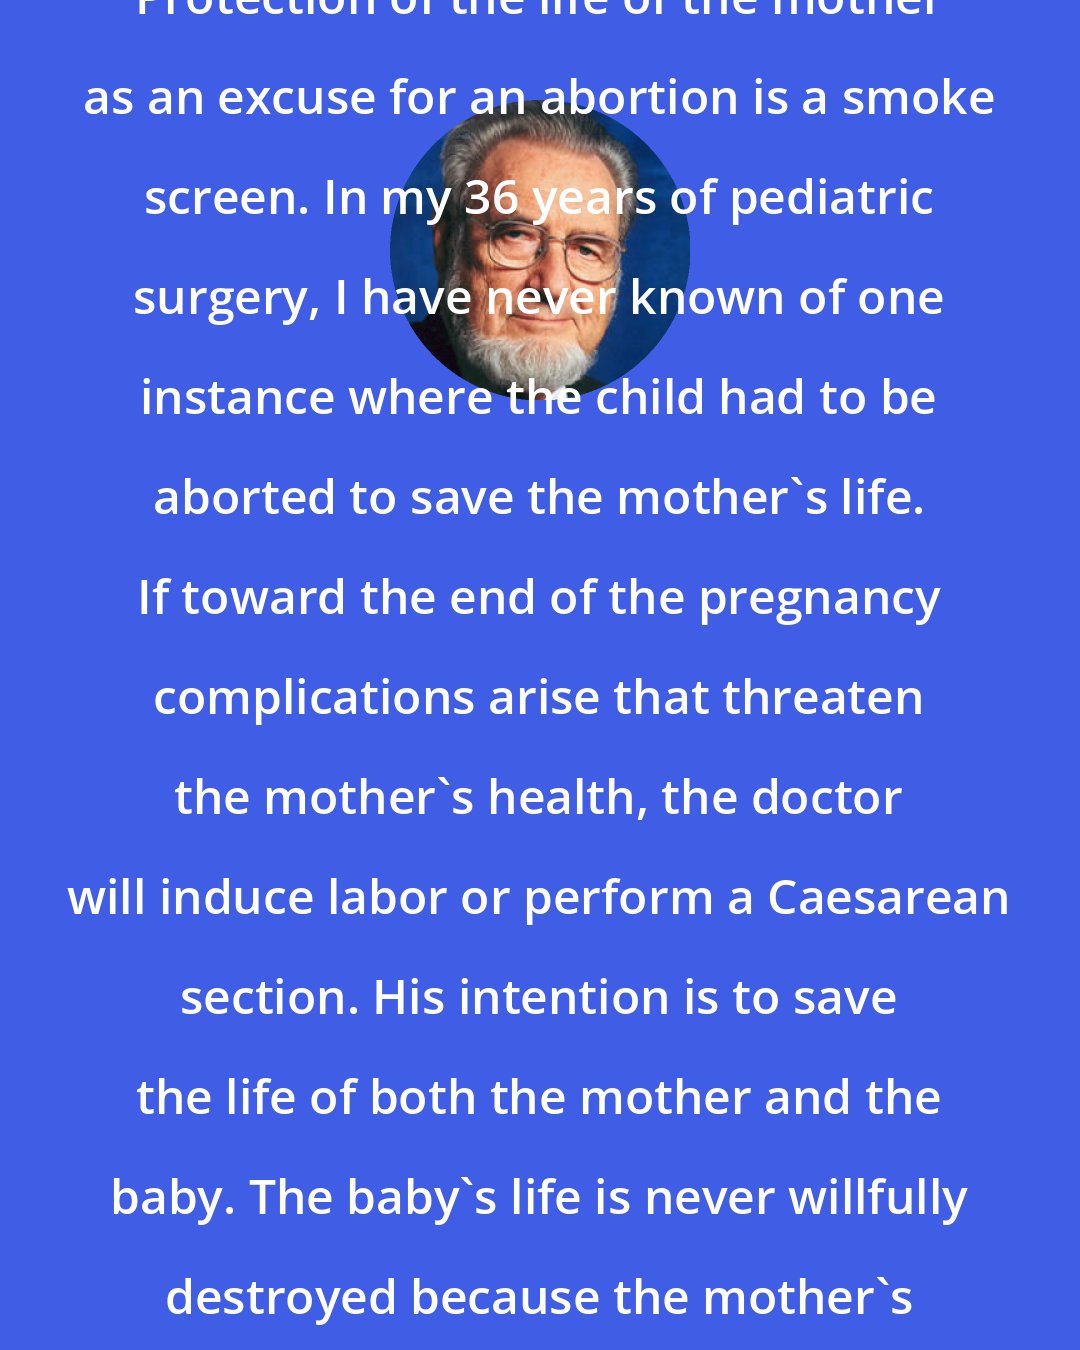 C. Everett Koop: Protection of the life of the mother as an excuse for an abortion is a smoke screen. In my 36 years of pediatric surgery, I have never known of one instance where the child had to be aborted to save the mother's life. If toward the end of the pregnancy complications arise that threaten the mother's health, the doctor will induce labor or perform a Caesarean section. His intention is to save the life of both the mother and the baby. The baby's life is never willfully destroyed because the mother's life is in danger.